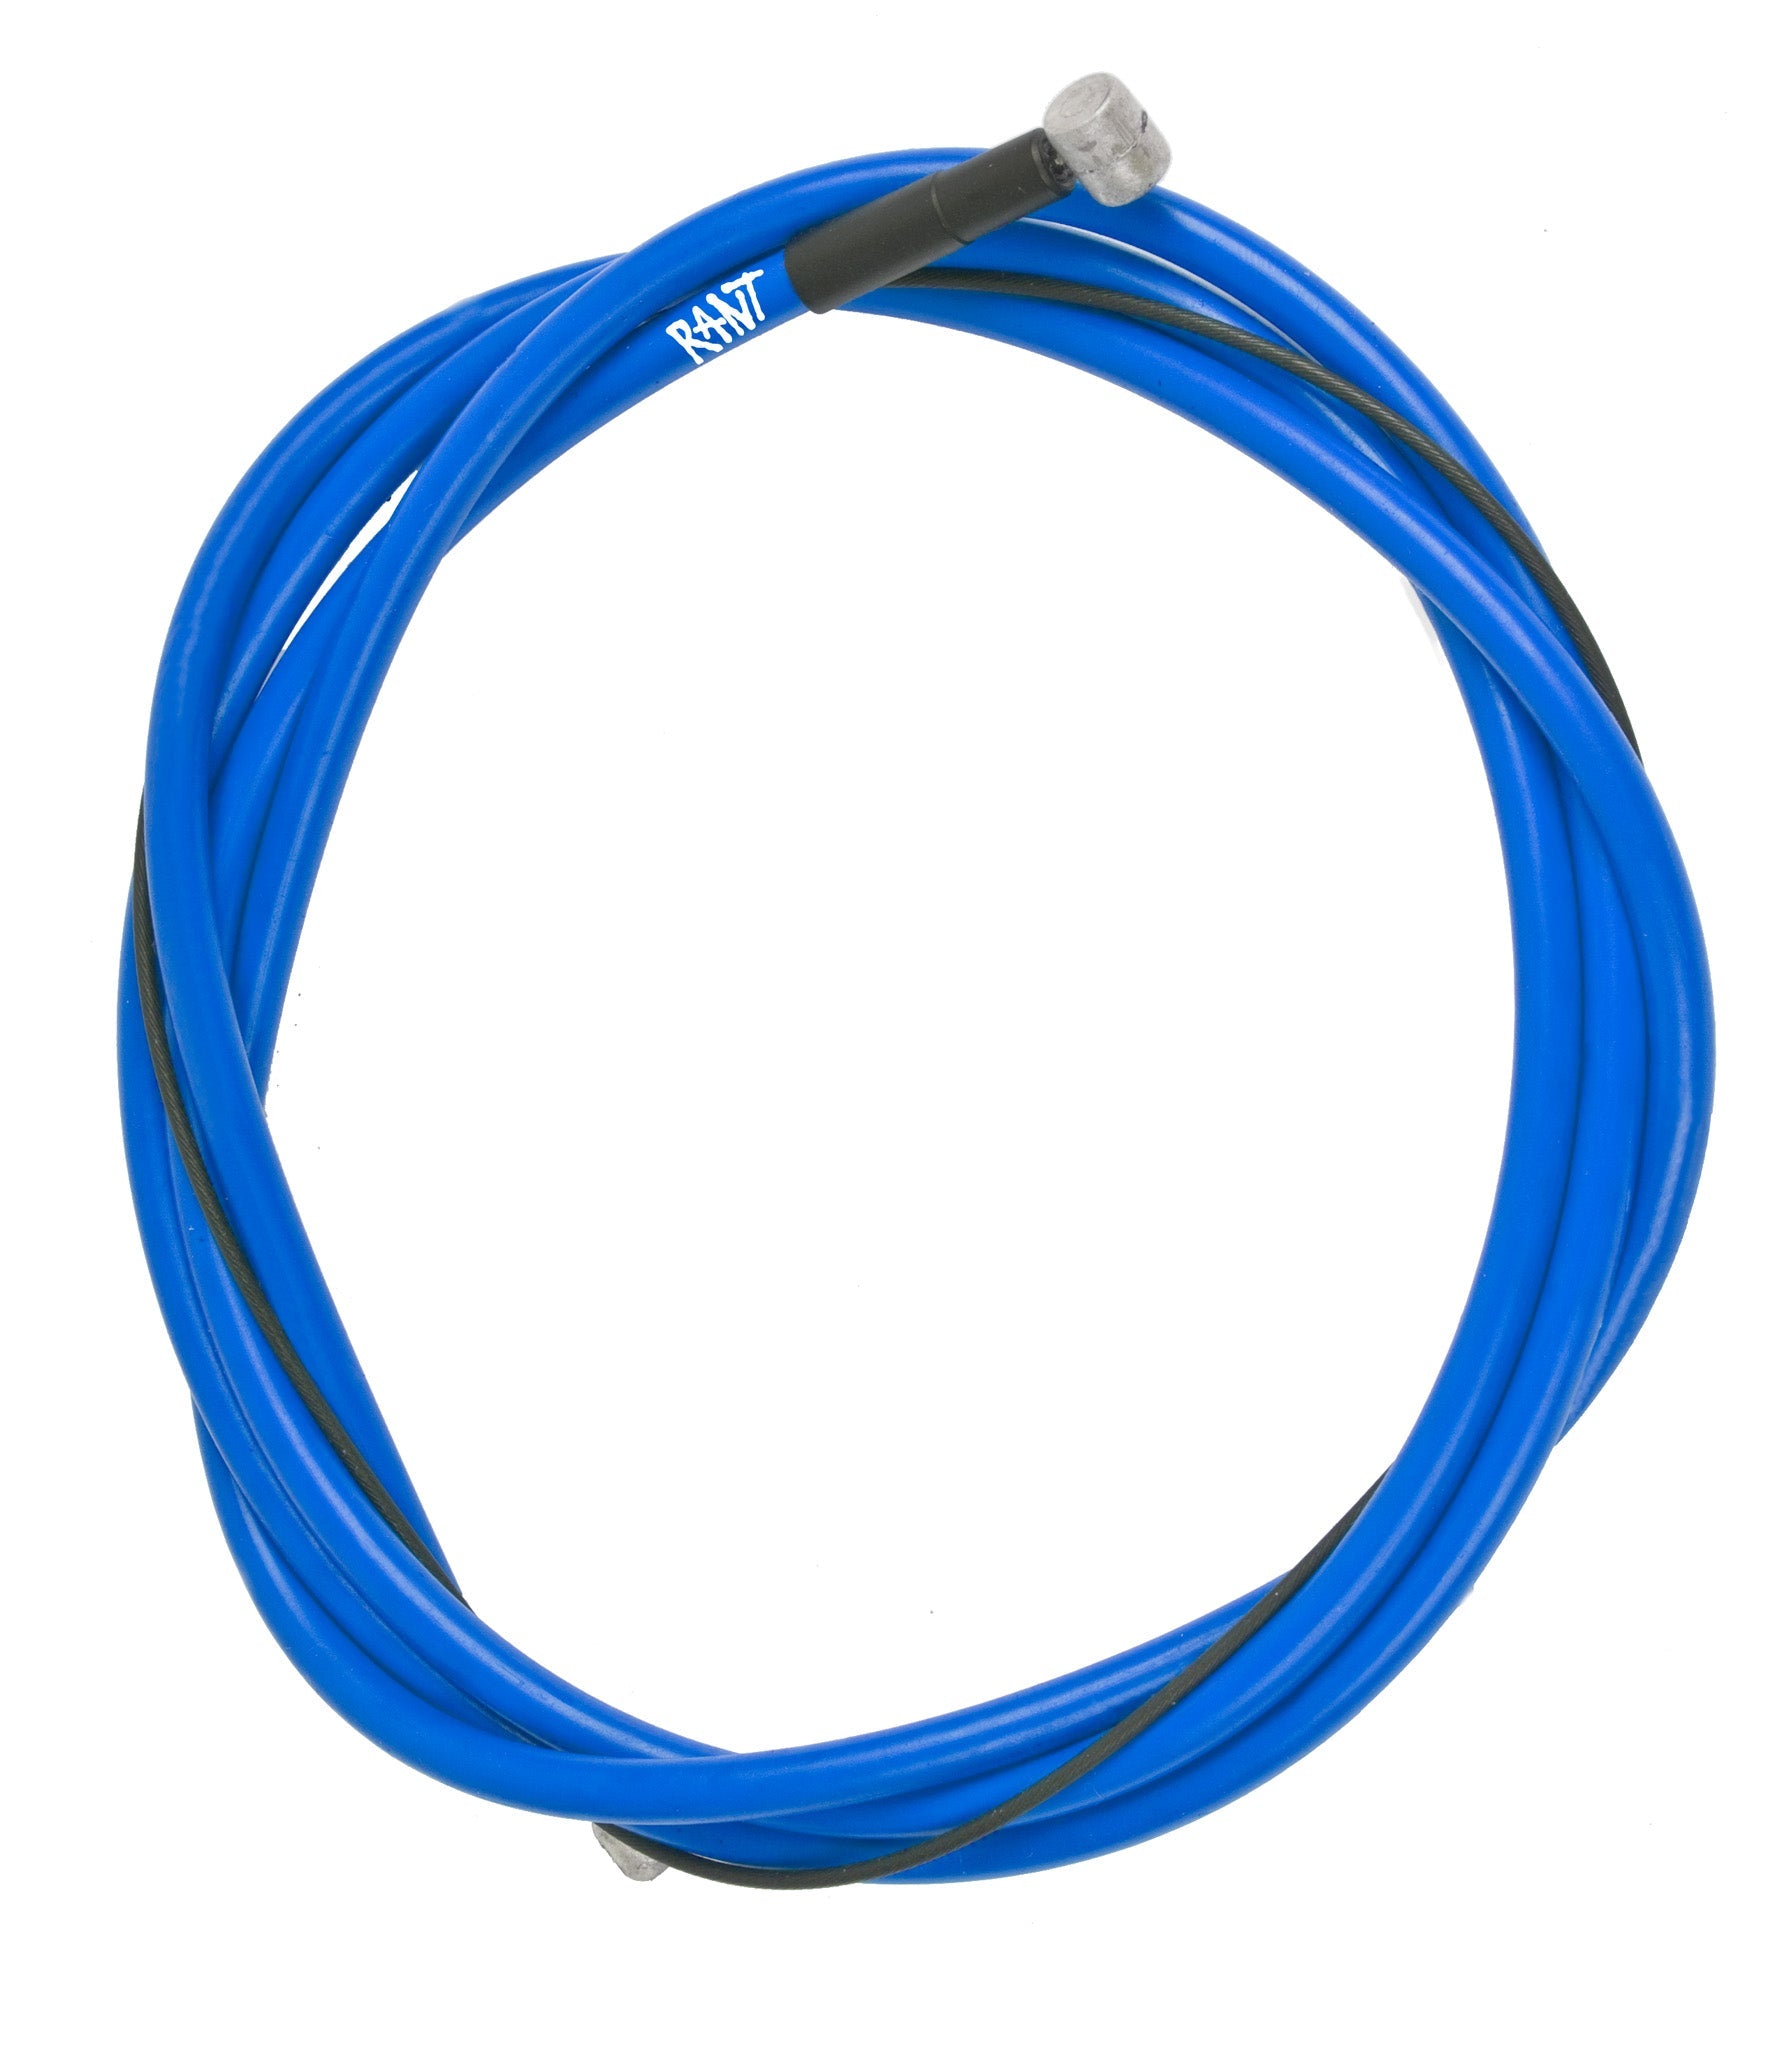 RANT Spring Brake Linear Cable (Blue) - Sparkys Brands Sparkys Brands  Brake Cables, Brakes and Cables, Components, Rant Bmx bmx pro quality freestyle bicycle